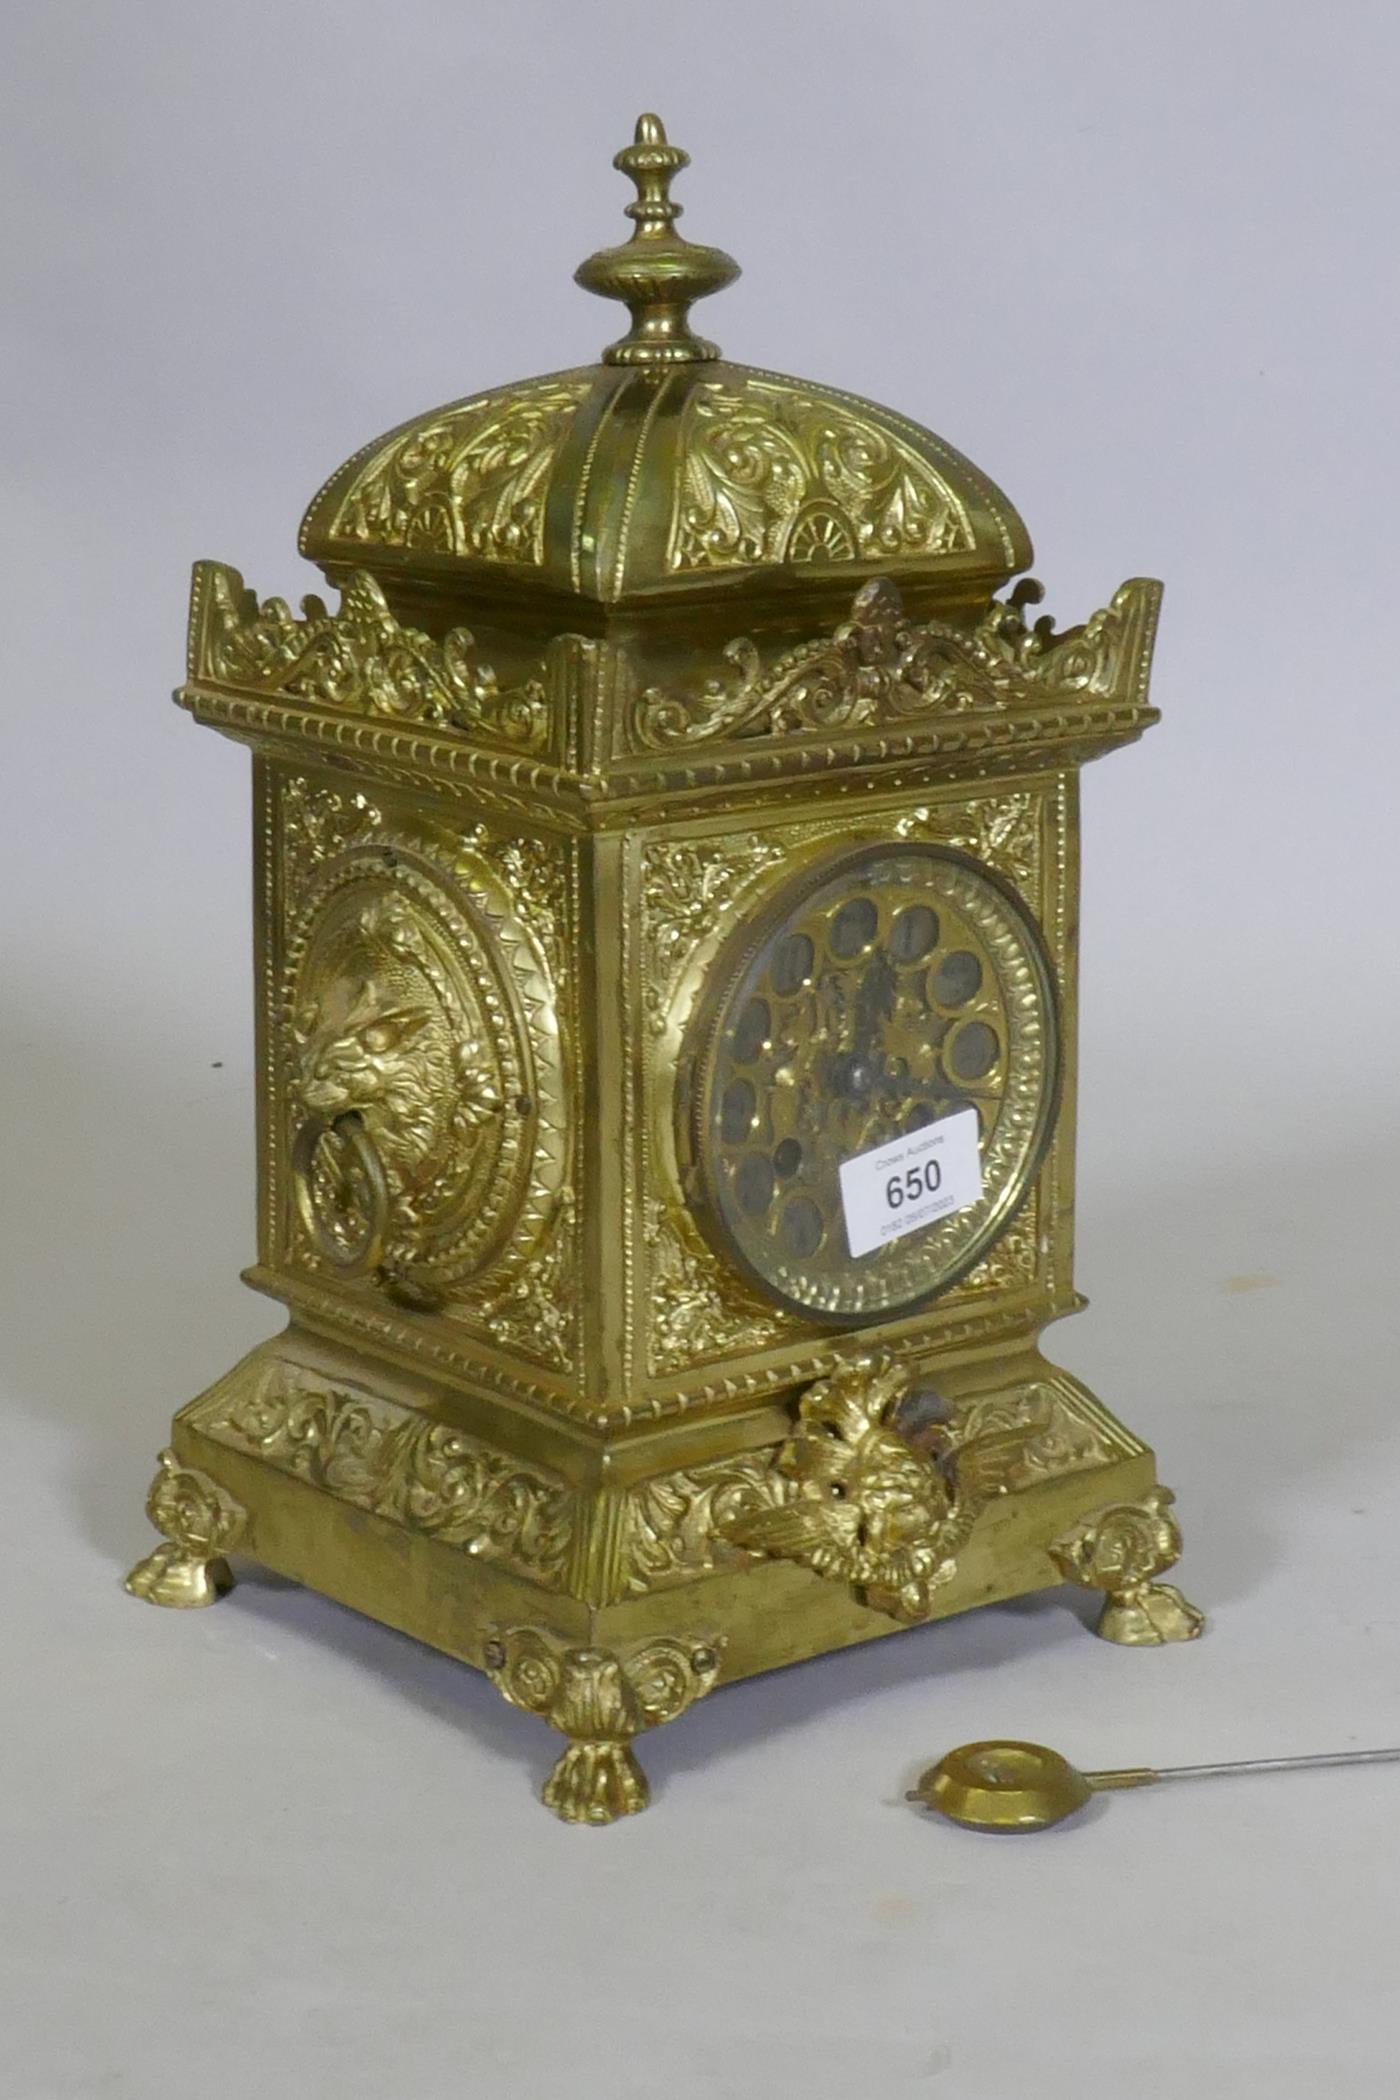 A C19th continental gilt brass mantel clock, the case with lion mask ring handles and raised - Image 2 of 4